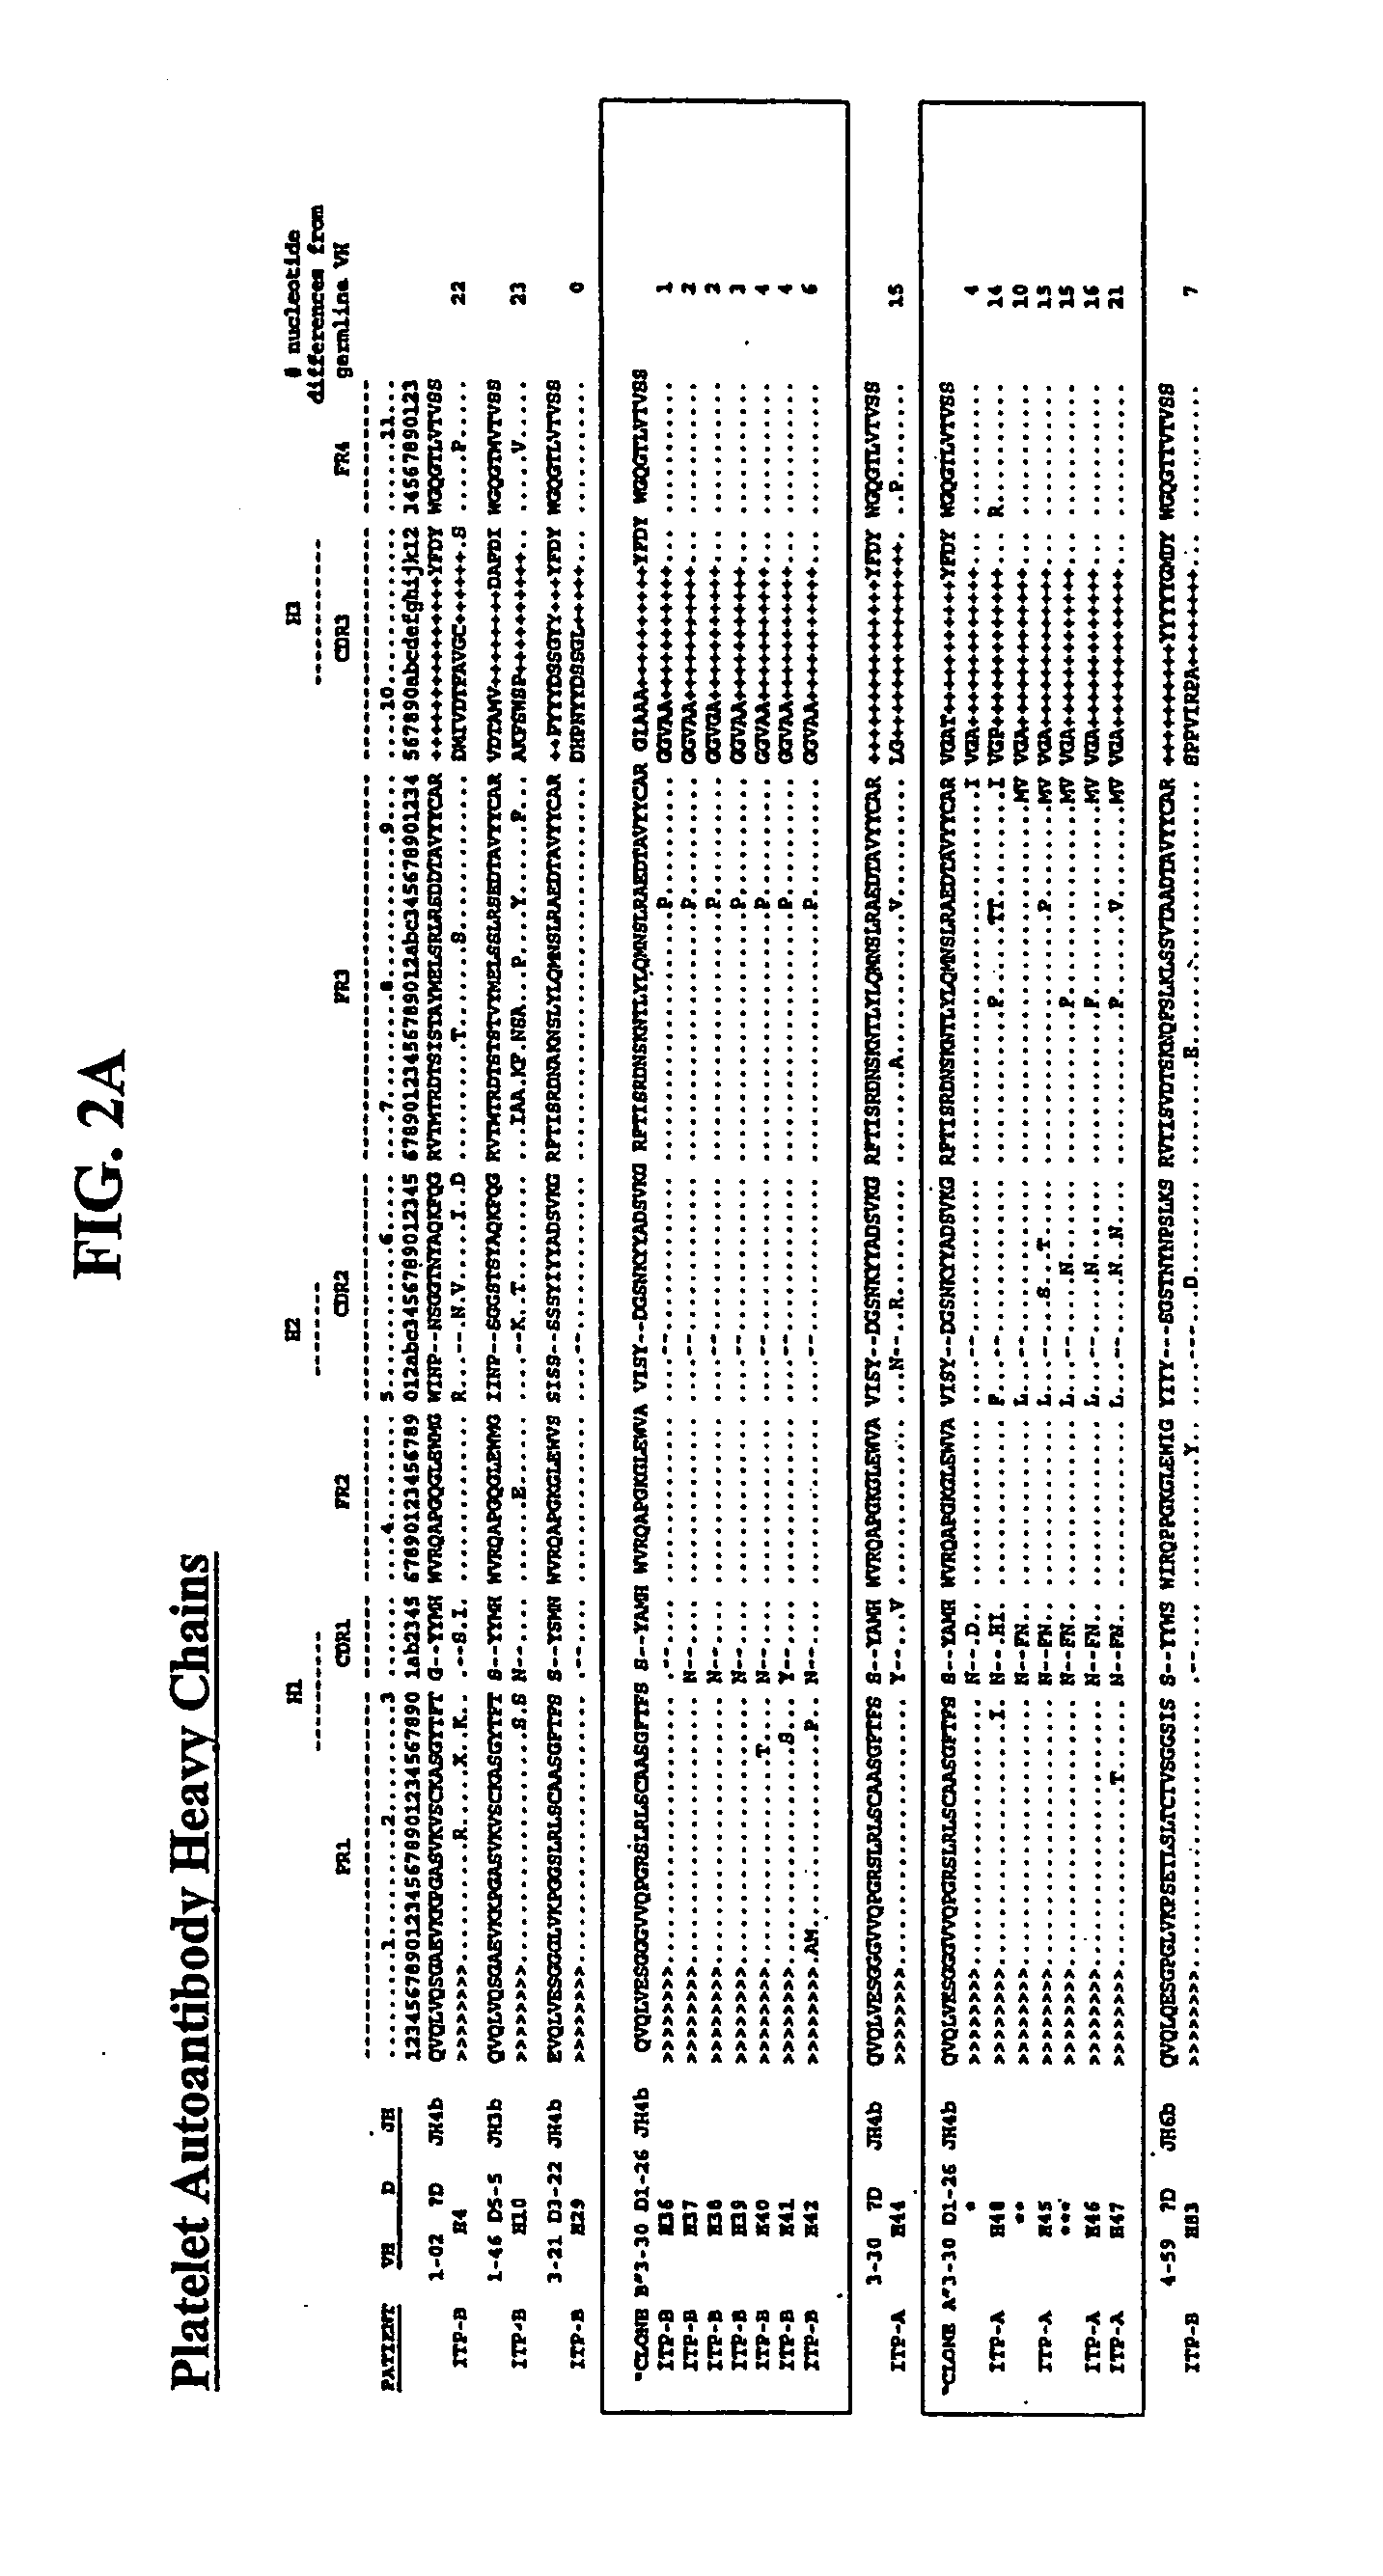 Compositions, methods and kits relating to anti-platelet autoantibodies and inhibitors thereof